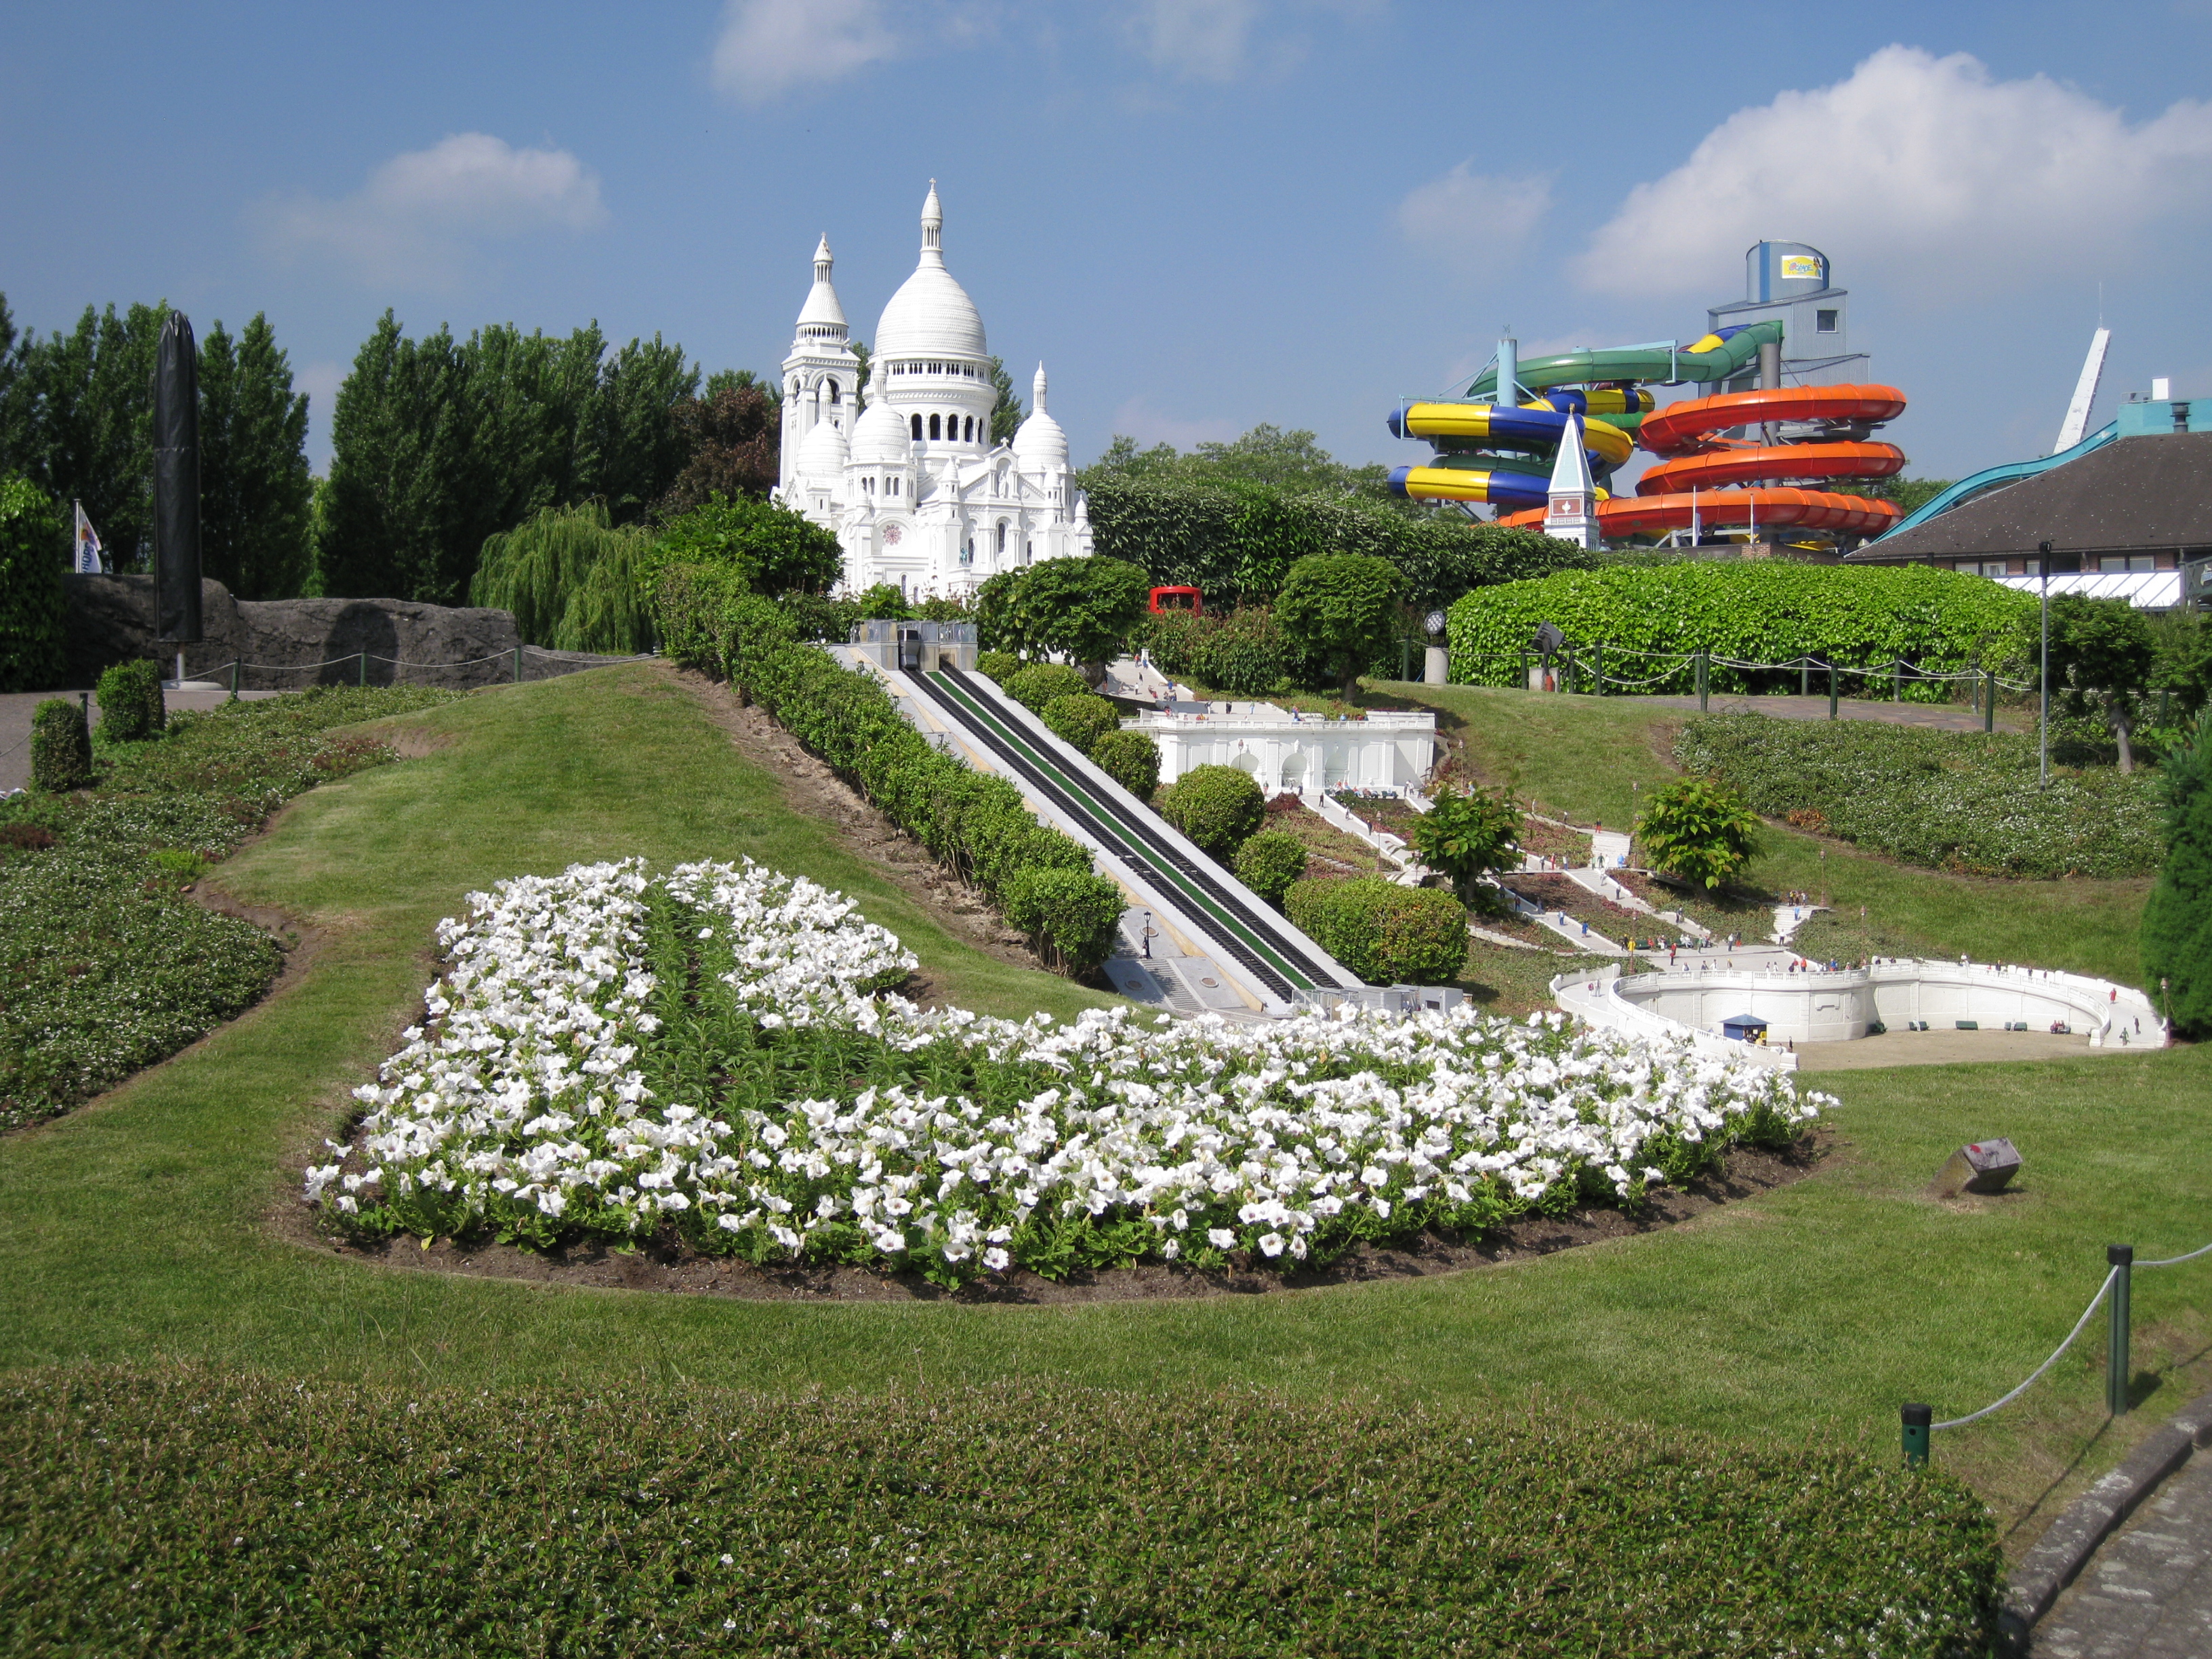 All you need to know before visiting Mini-Europe in Brussels